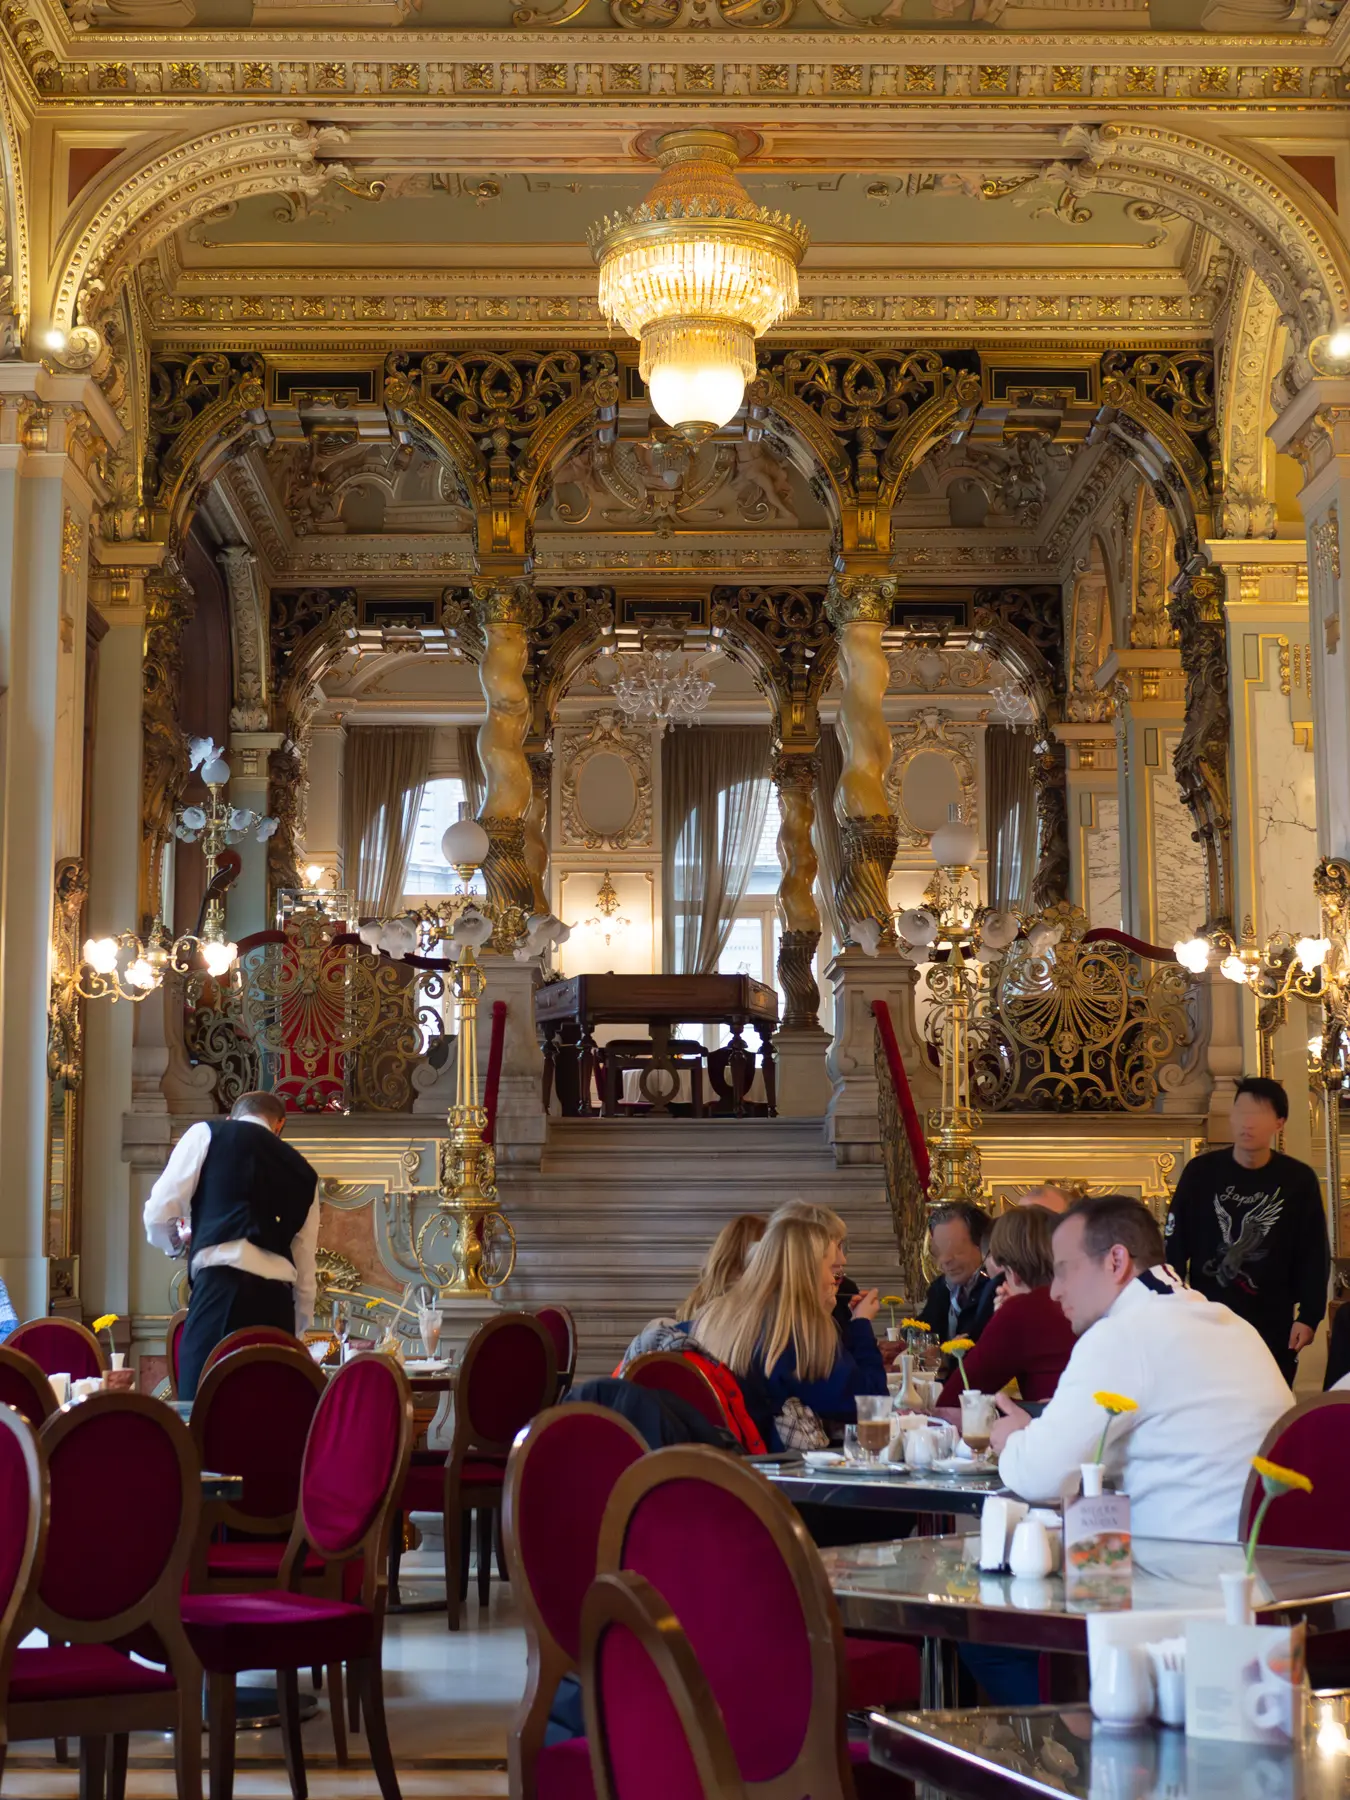 People sitting at tables on red velvet chairs inside the ornate gilded New York Café in Budapest.